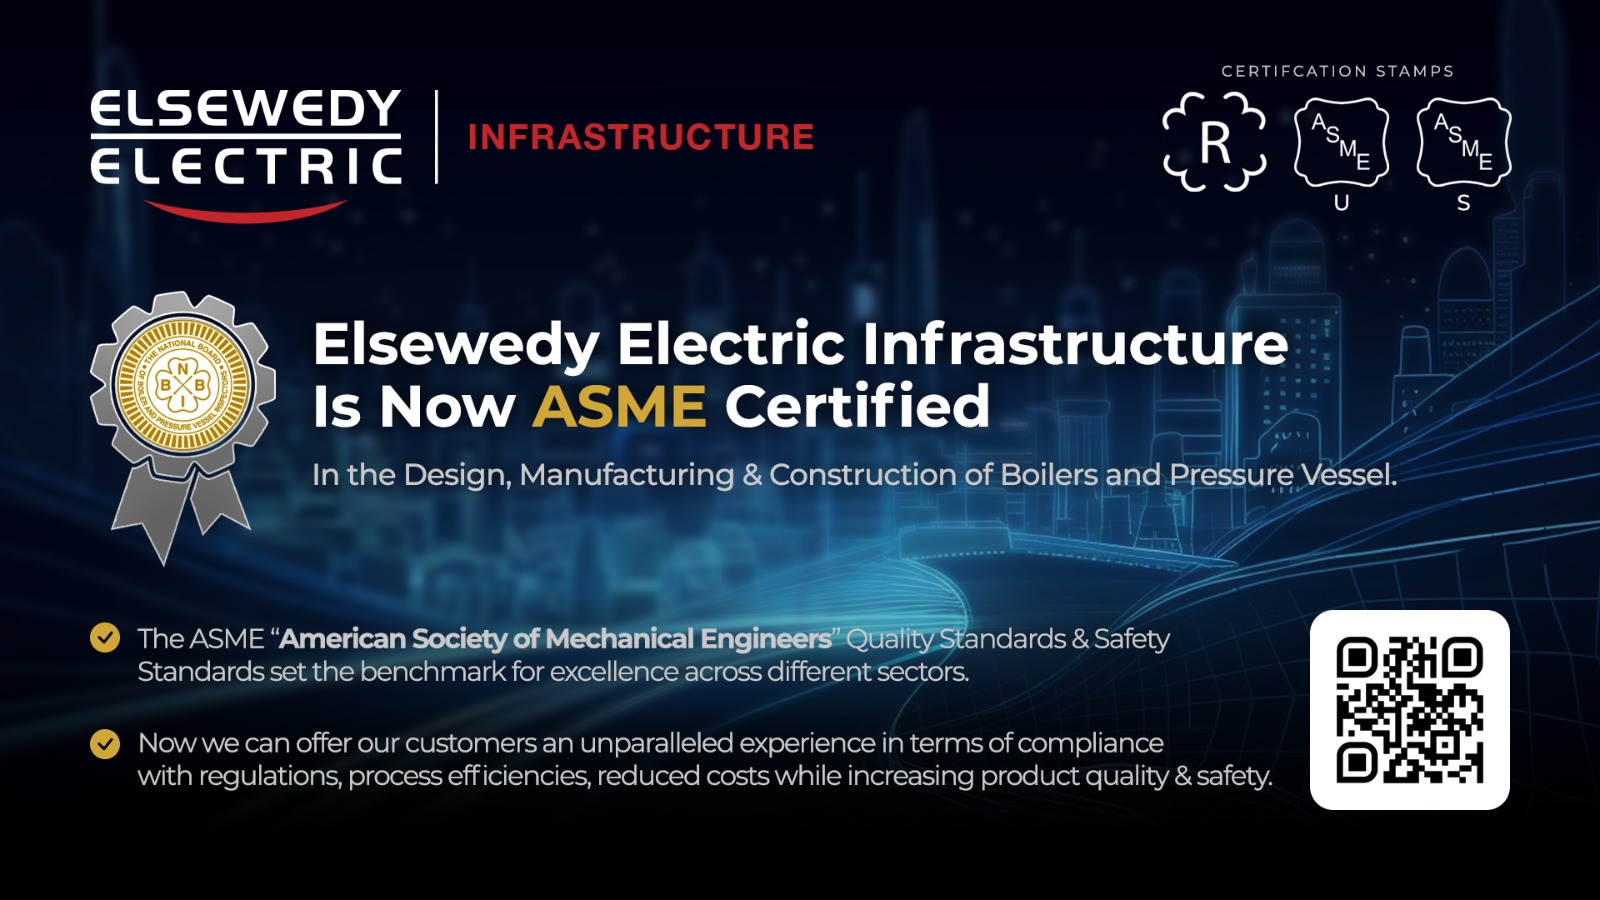 Elsewedy Electric Infrastructure Receives Coveted ASME Certification: Design, Manufacture, Construct Boilers and Pressure Vessels